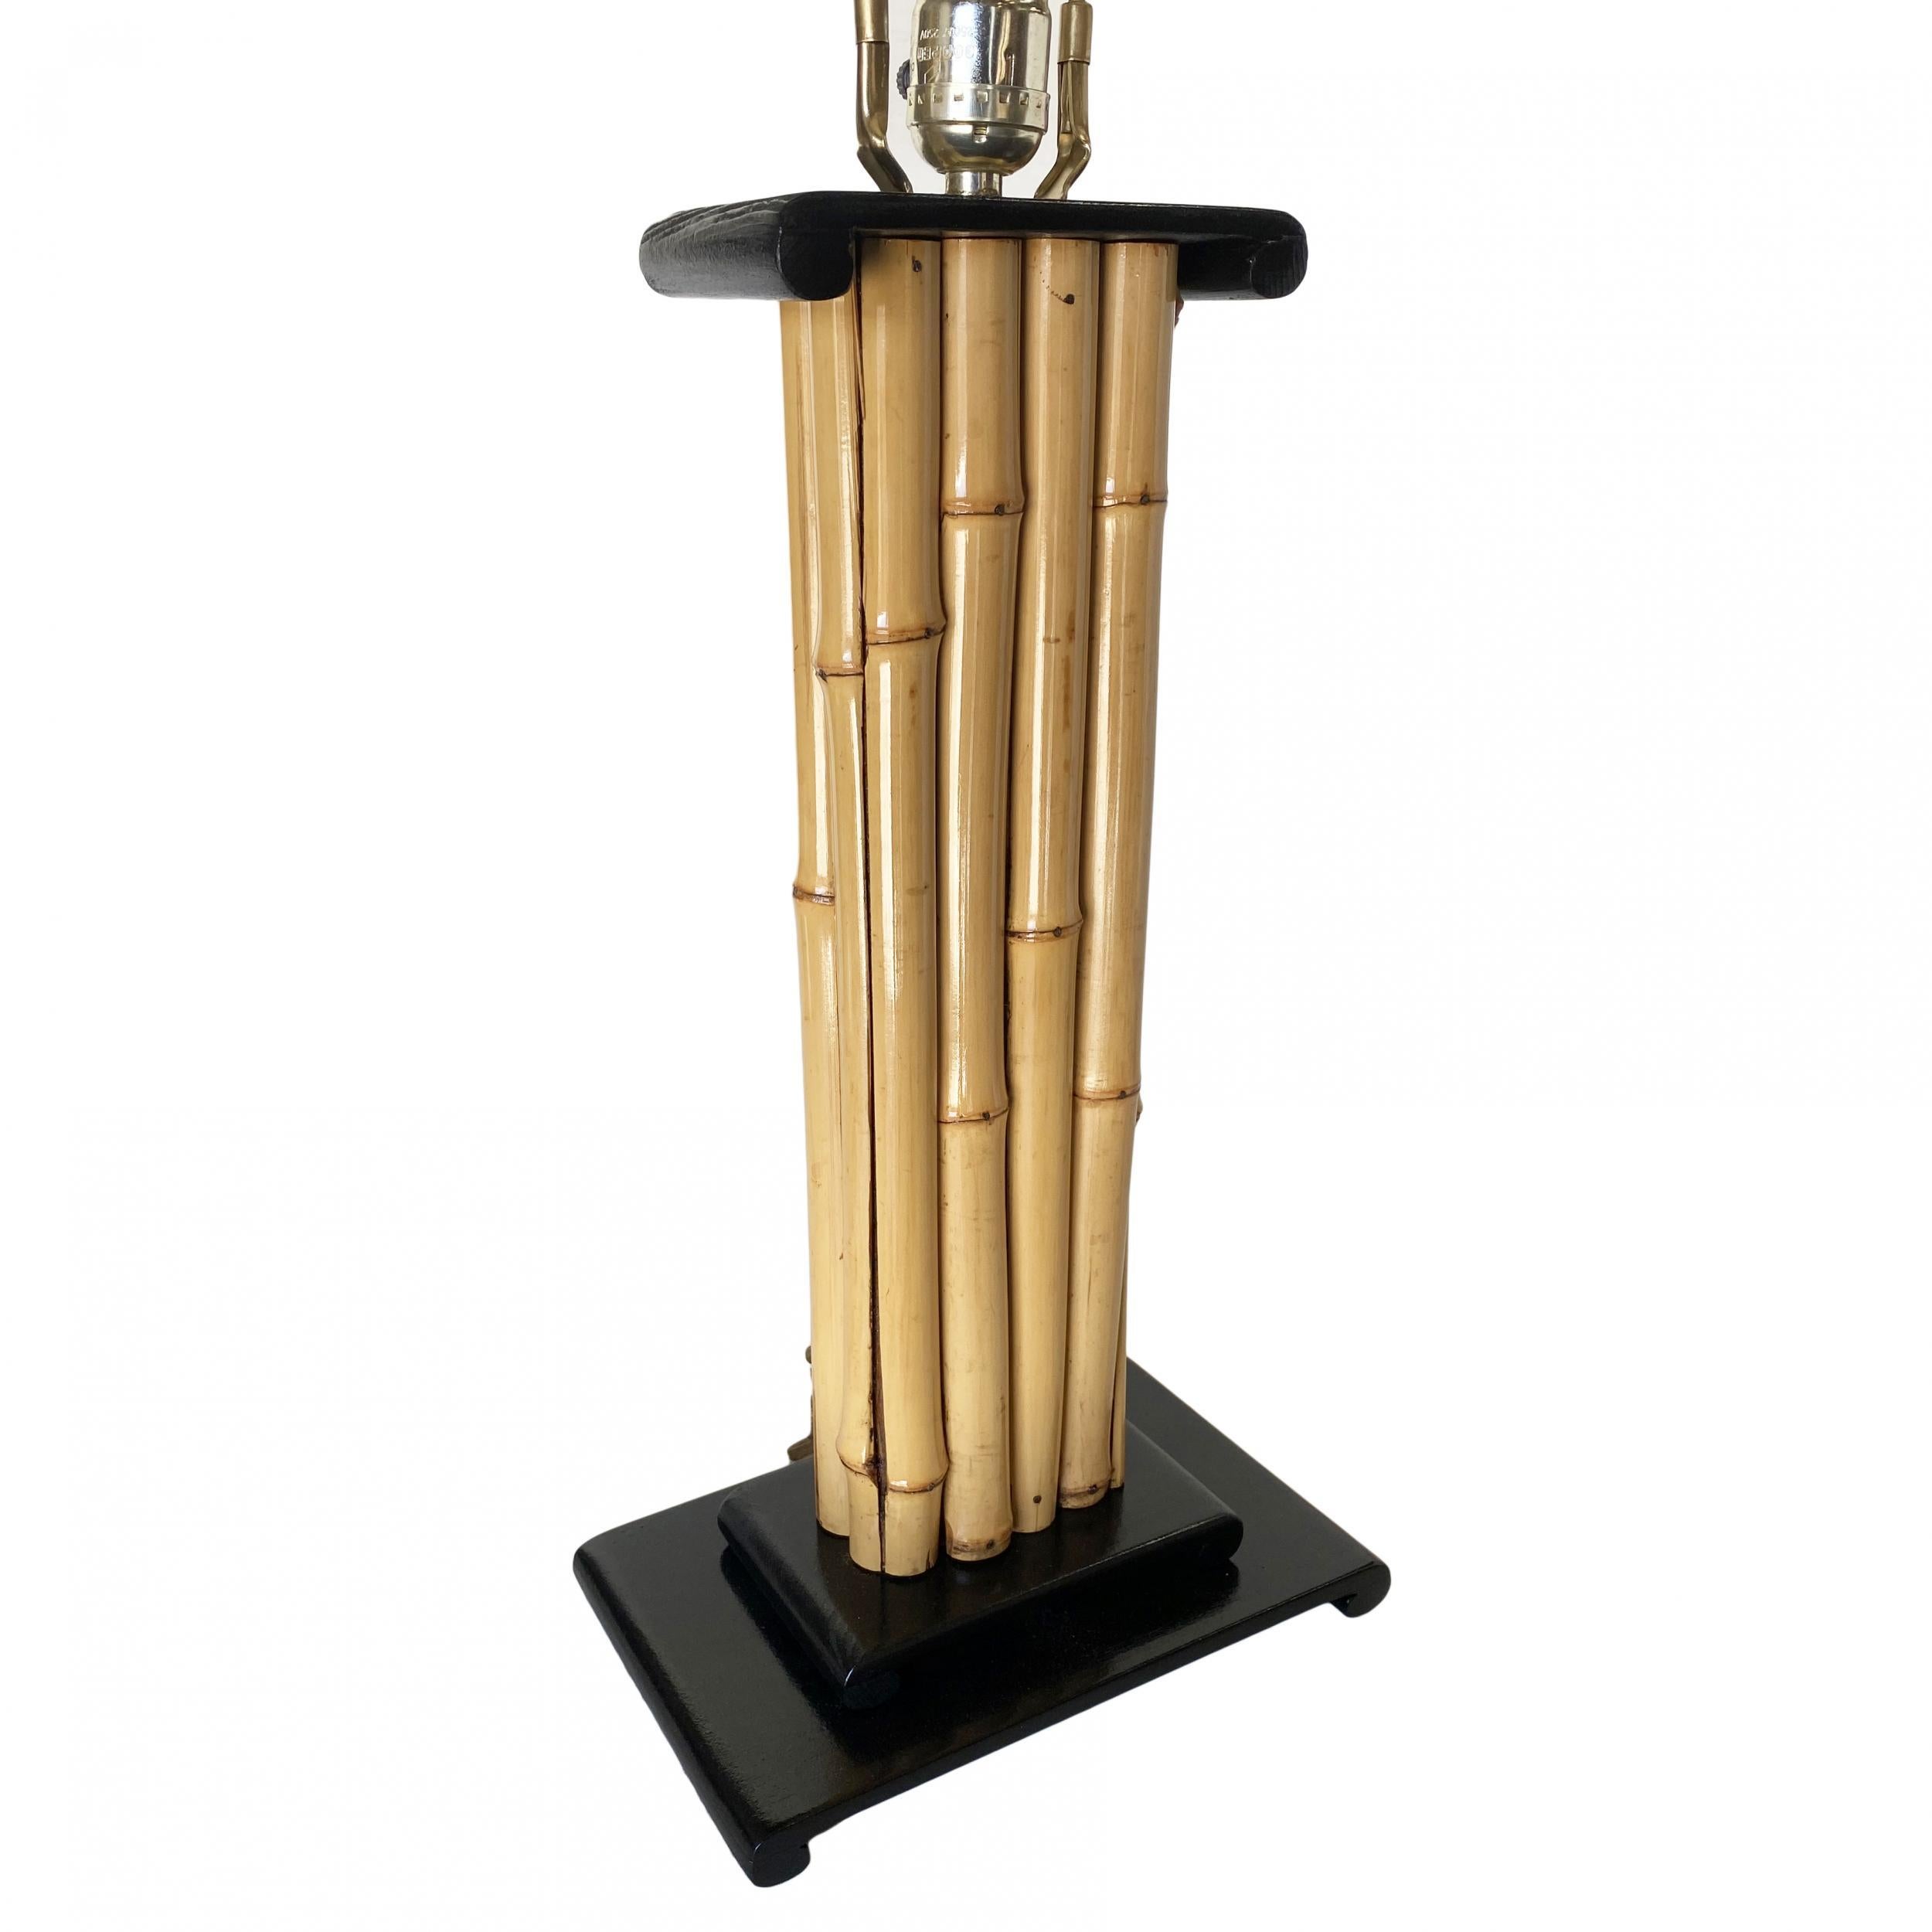 Vertically stacked rattan pole lamp with black lacquer demi mahogany base and top cap piece.

Restored to new for you.

All rattan, bamboo, and wicker furniture has been painstakingly refurbished to the highest standards with the best materials. All